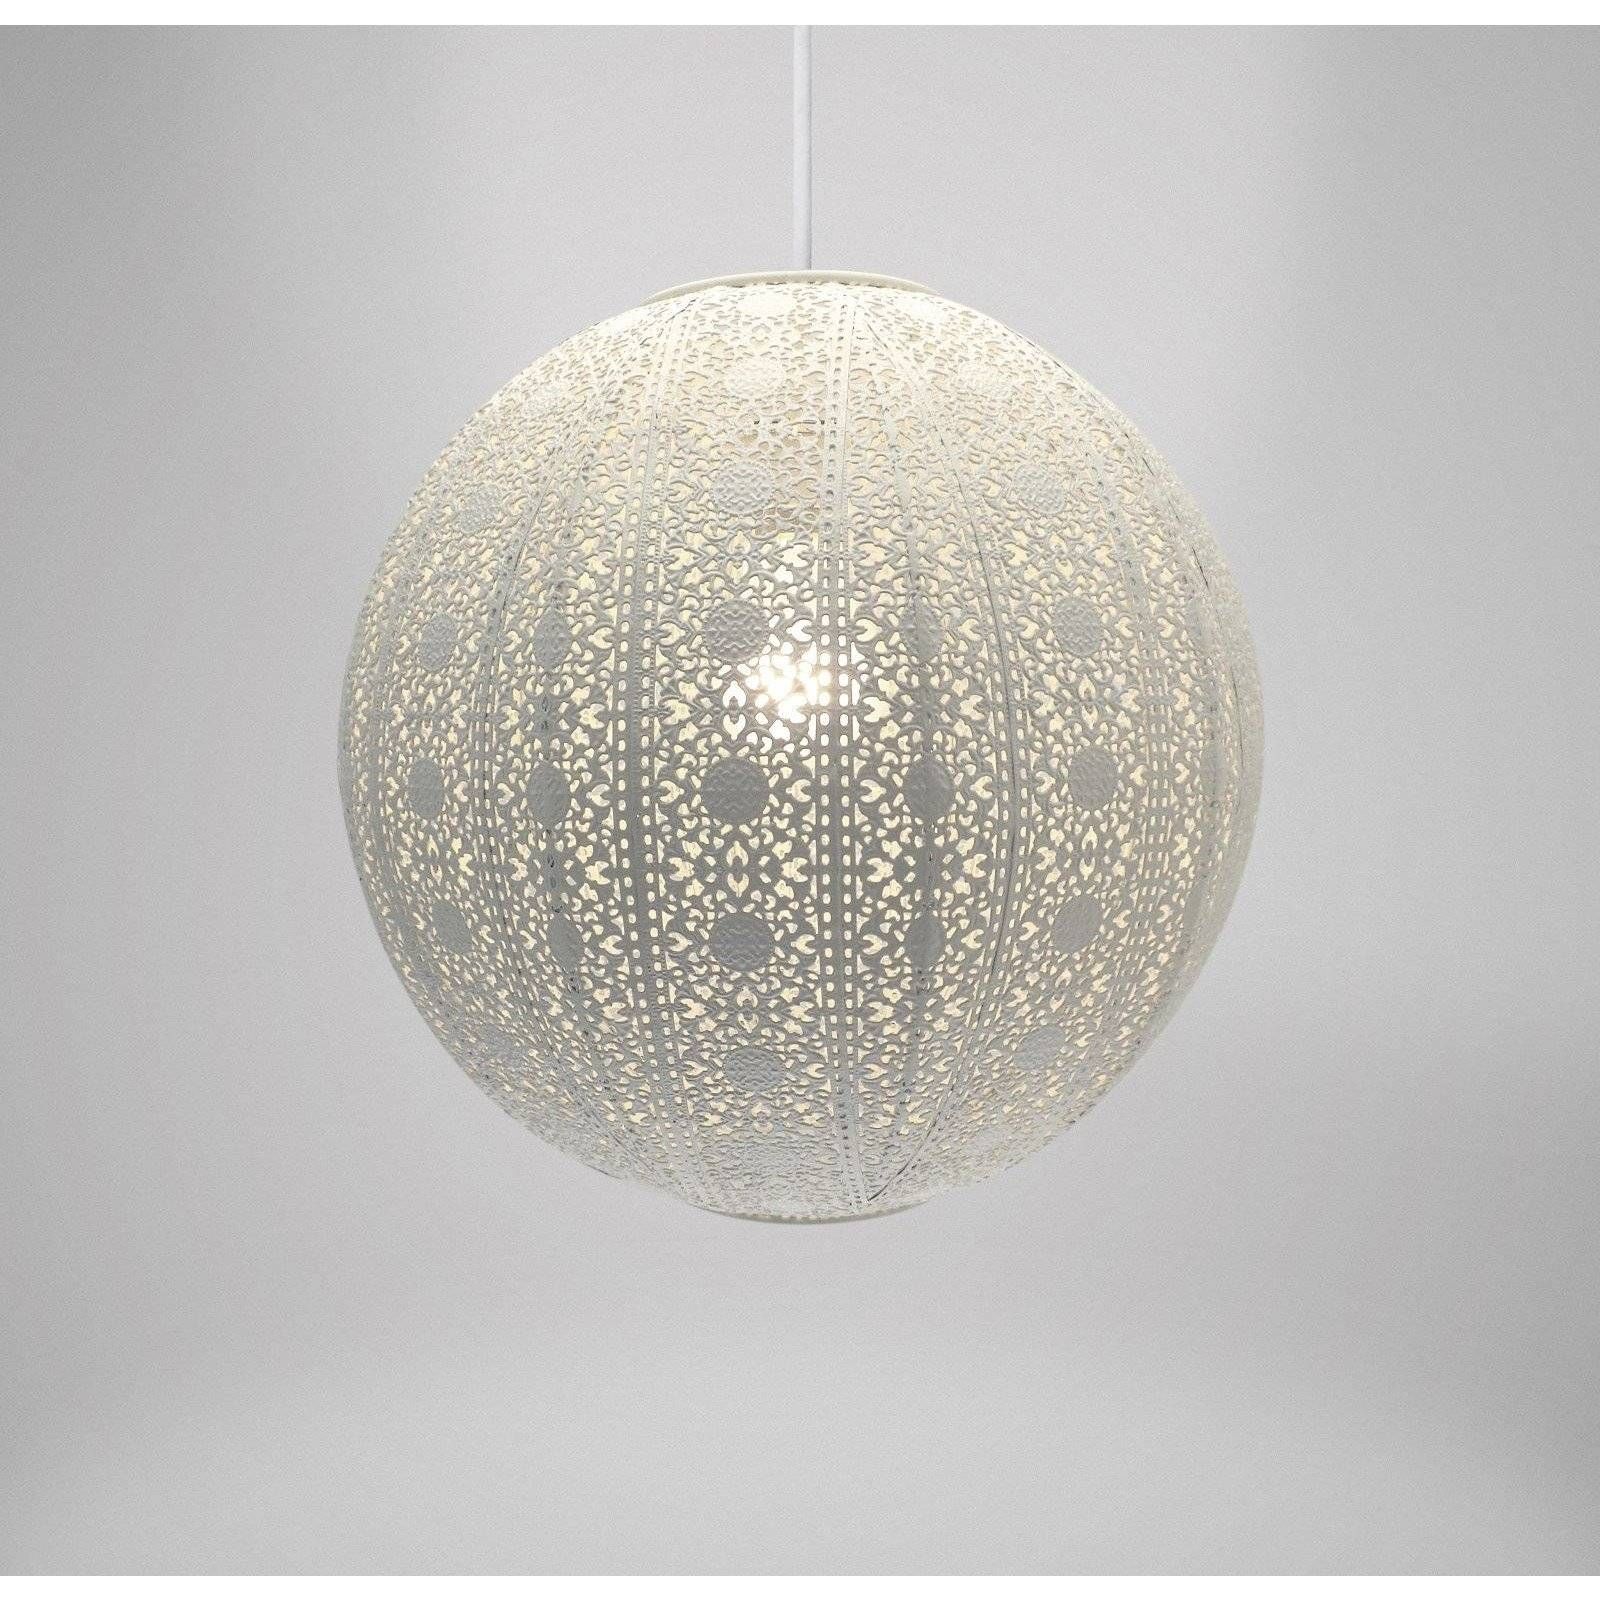 Buy Moroccan Style Pendant Lights – Punched Metal Design At This Throughout Easy Fit Pendant Lights (View 9 of 15)